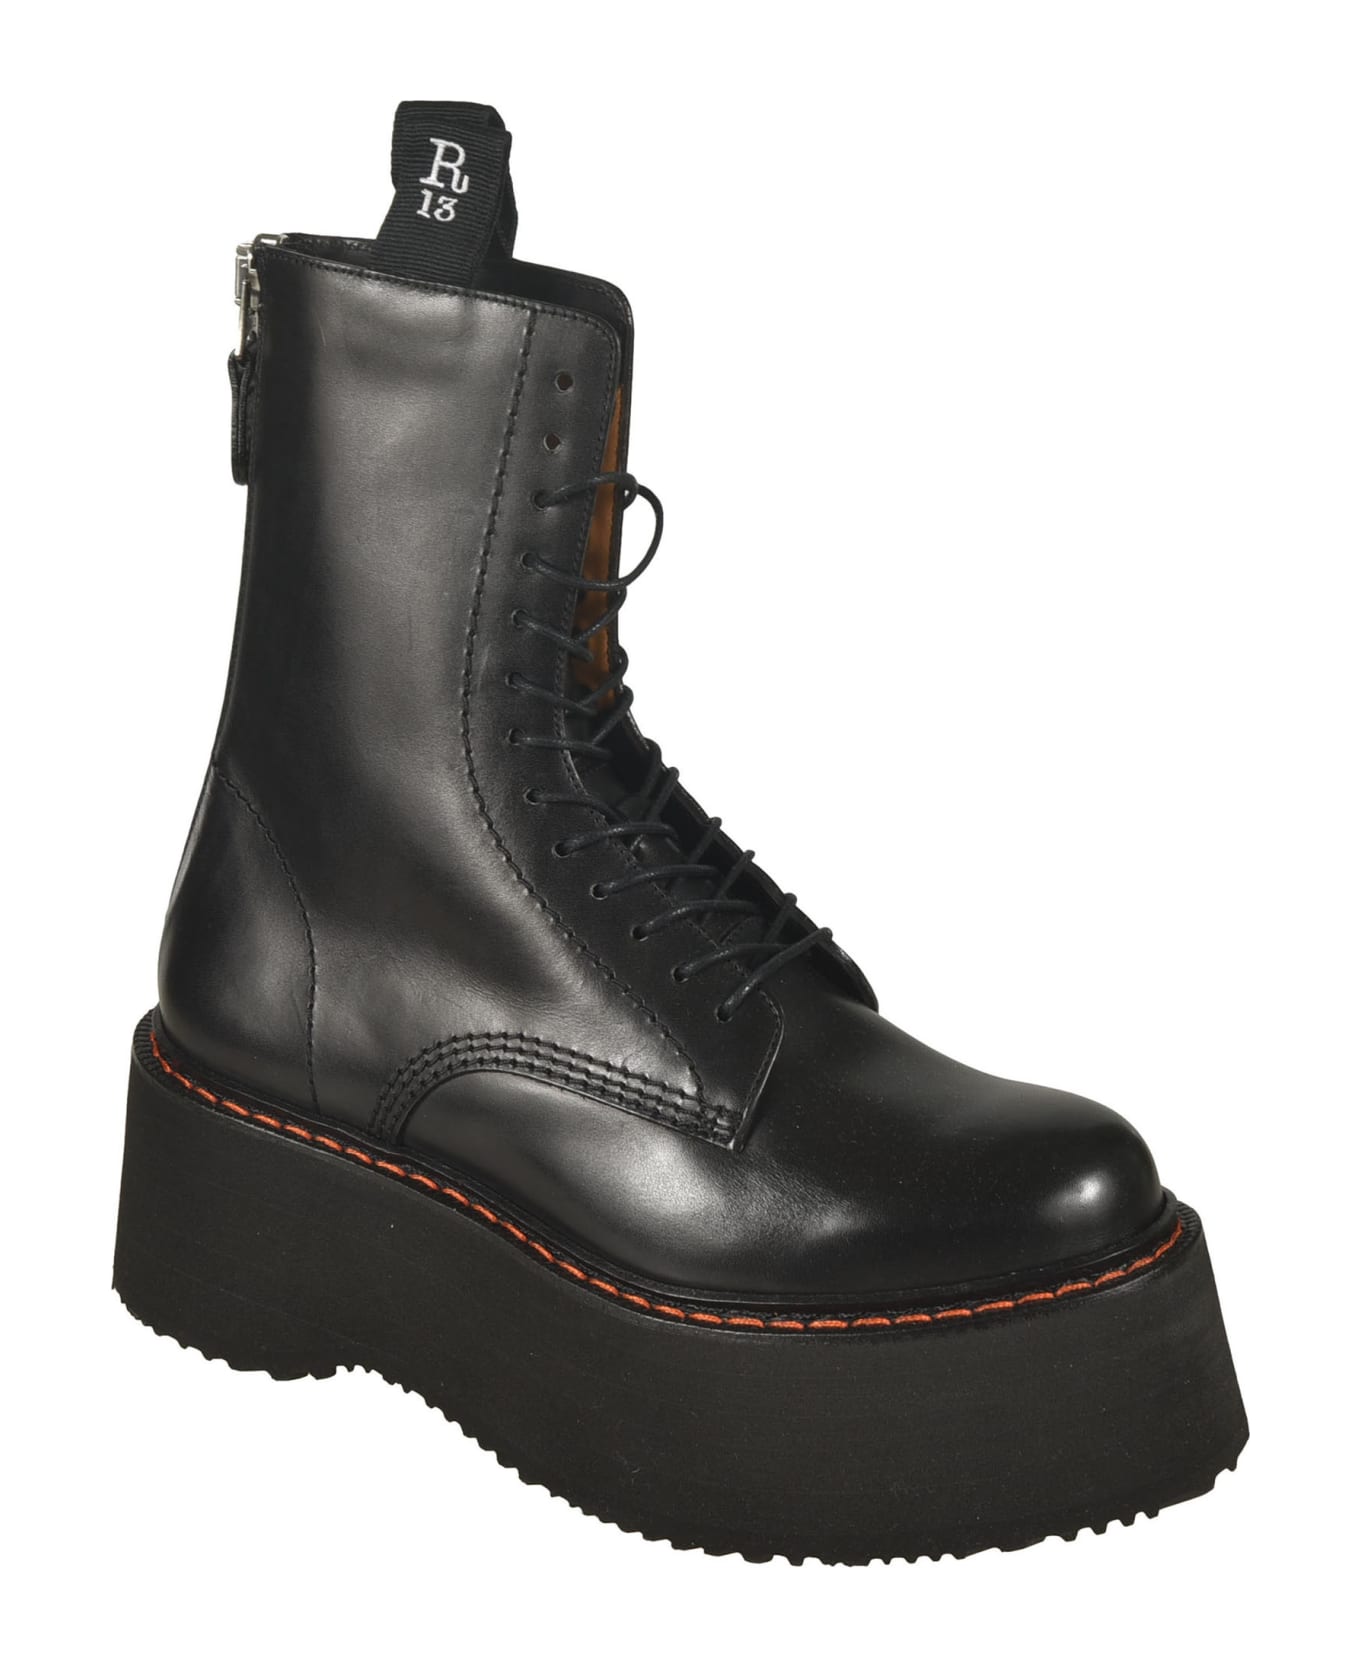 R13 X-stack Boots - Black ブーツ